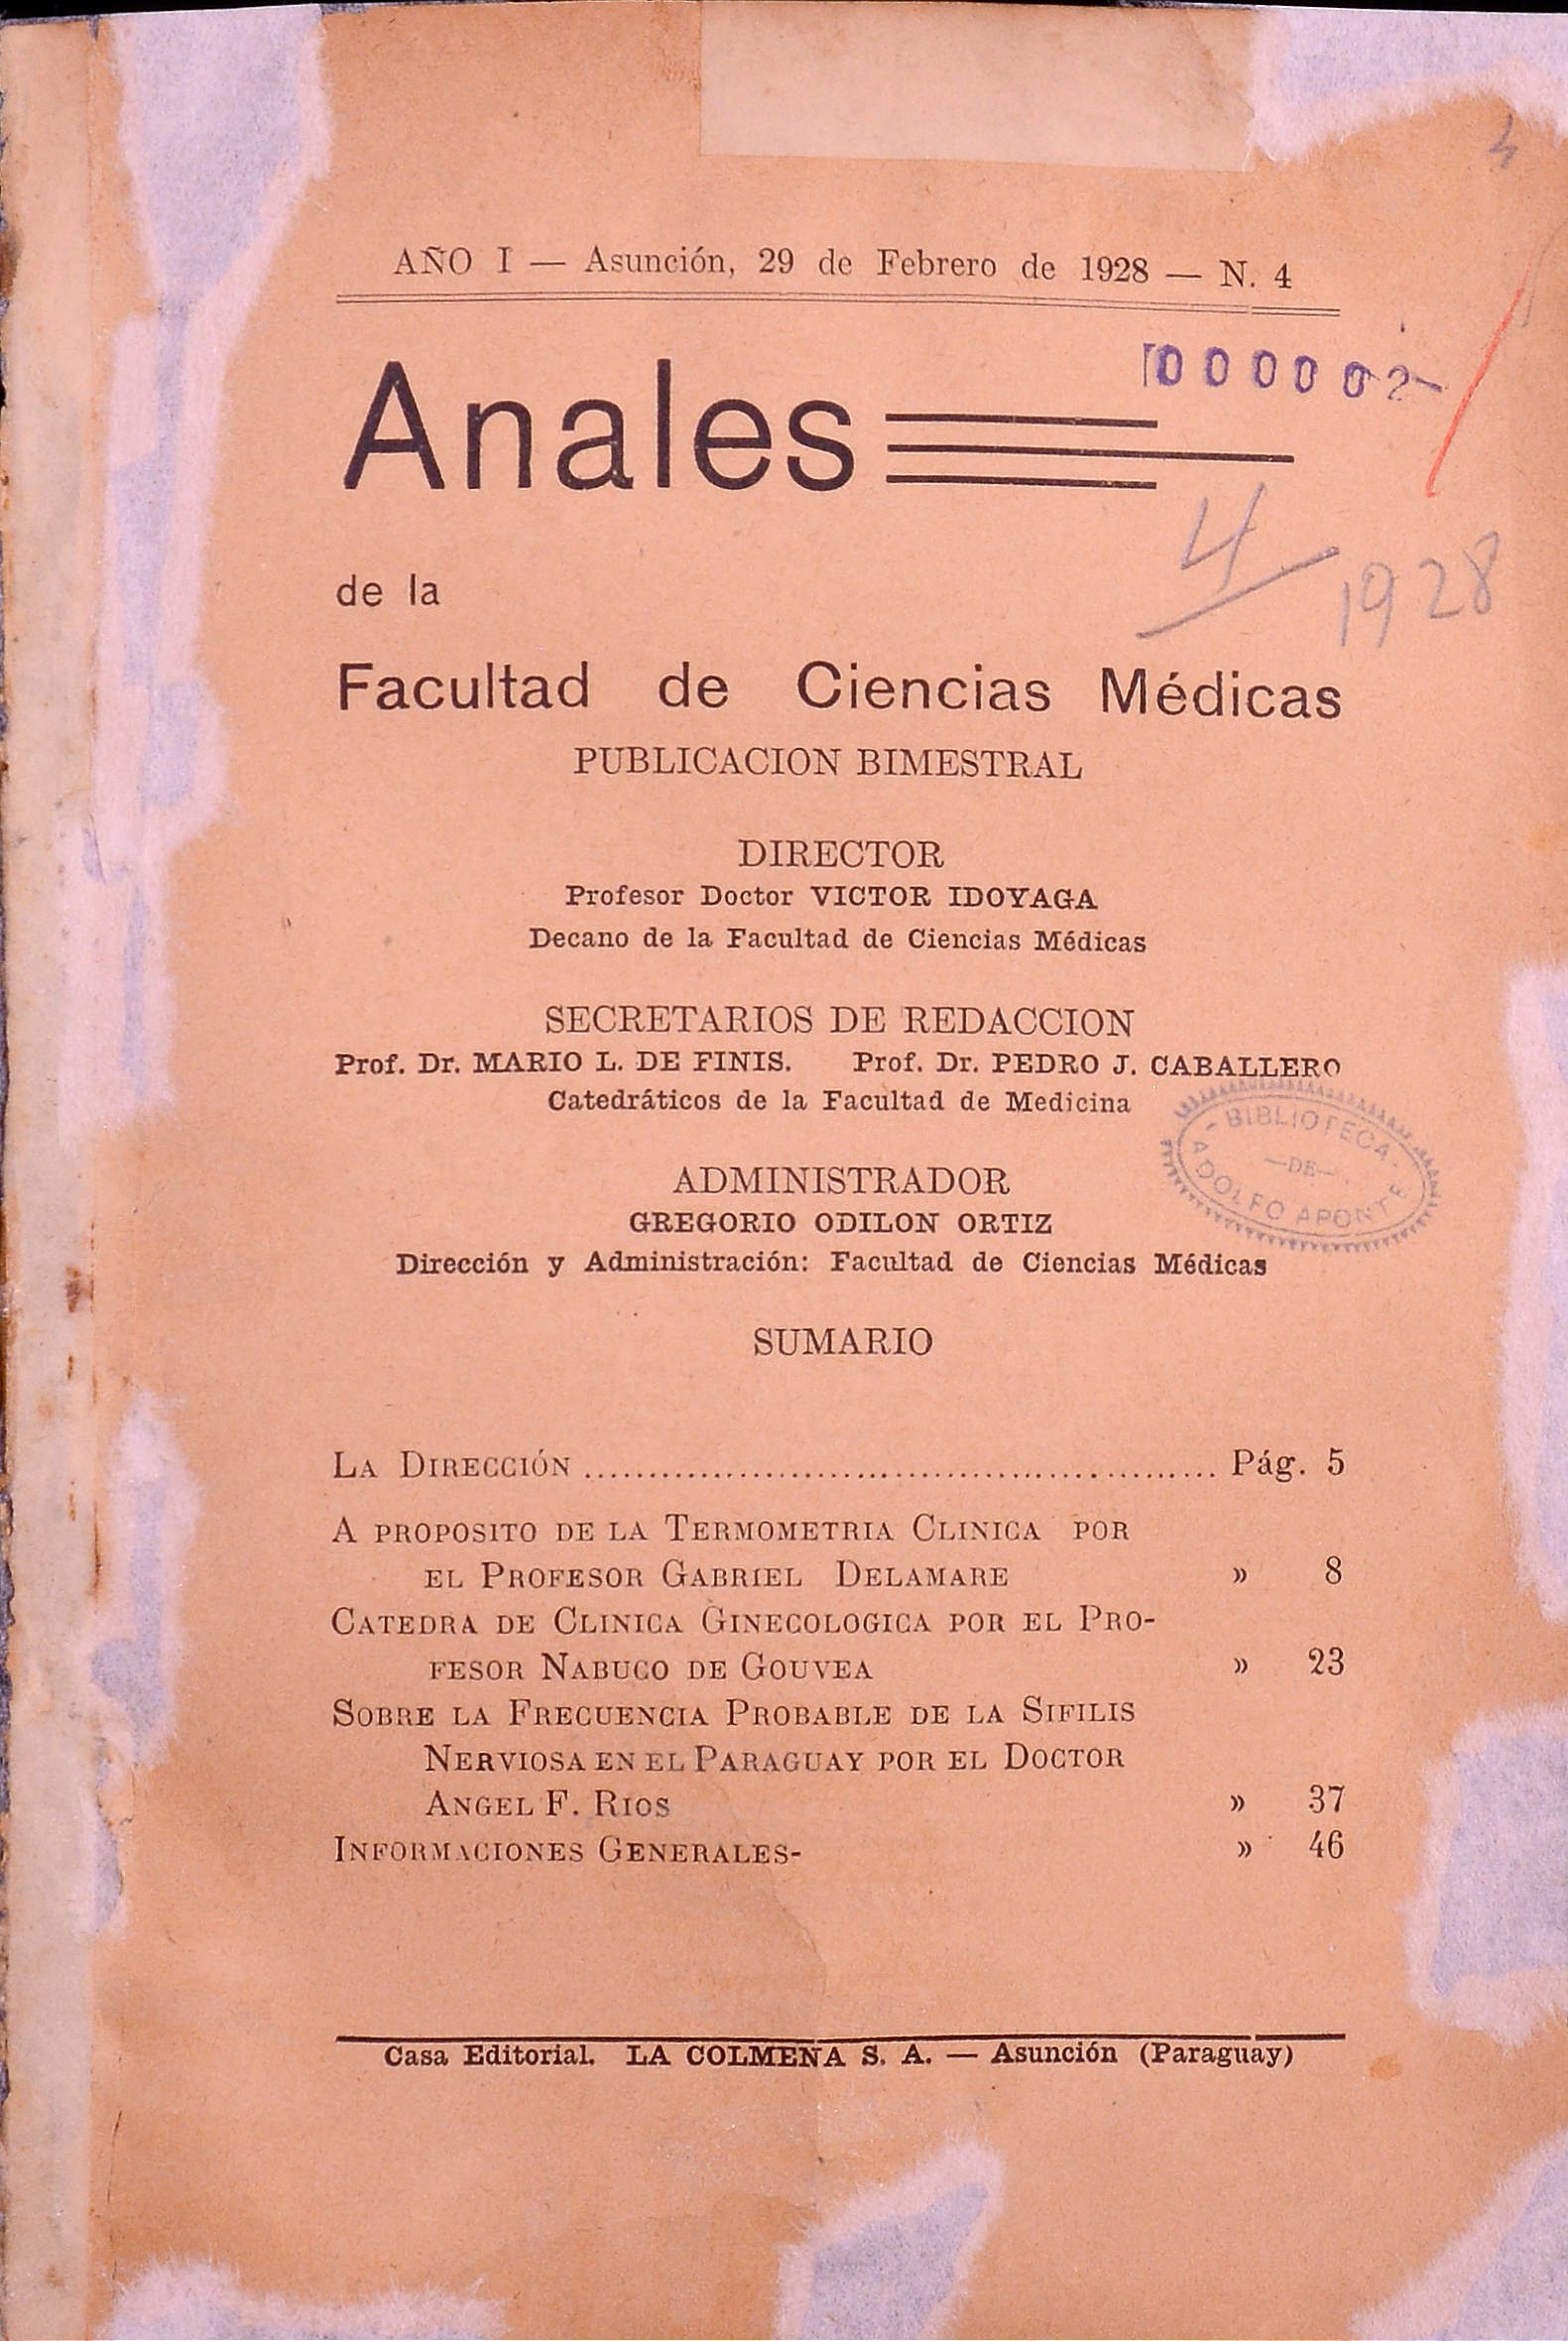 					View Vol. 1 No. 4 (1928): ANALES of the Faculty of Medical Sciences
				